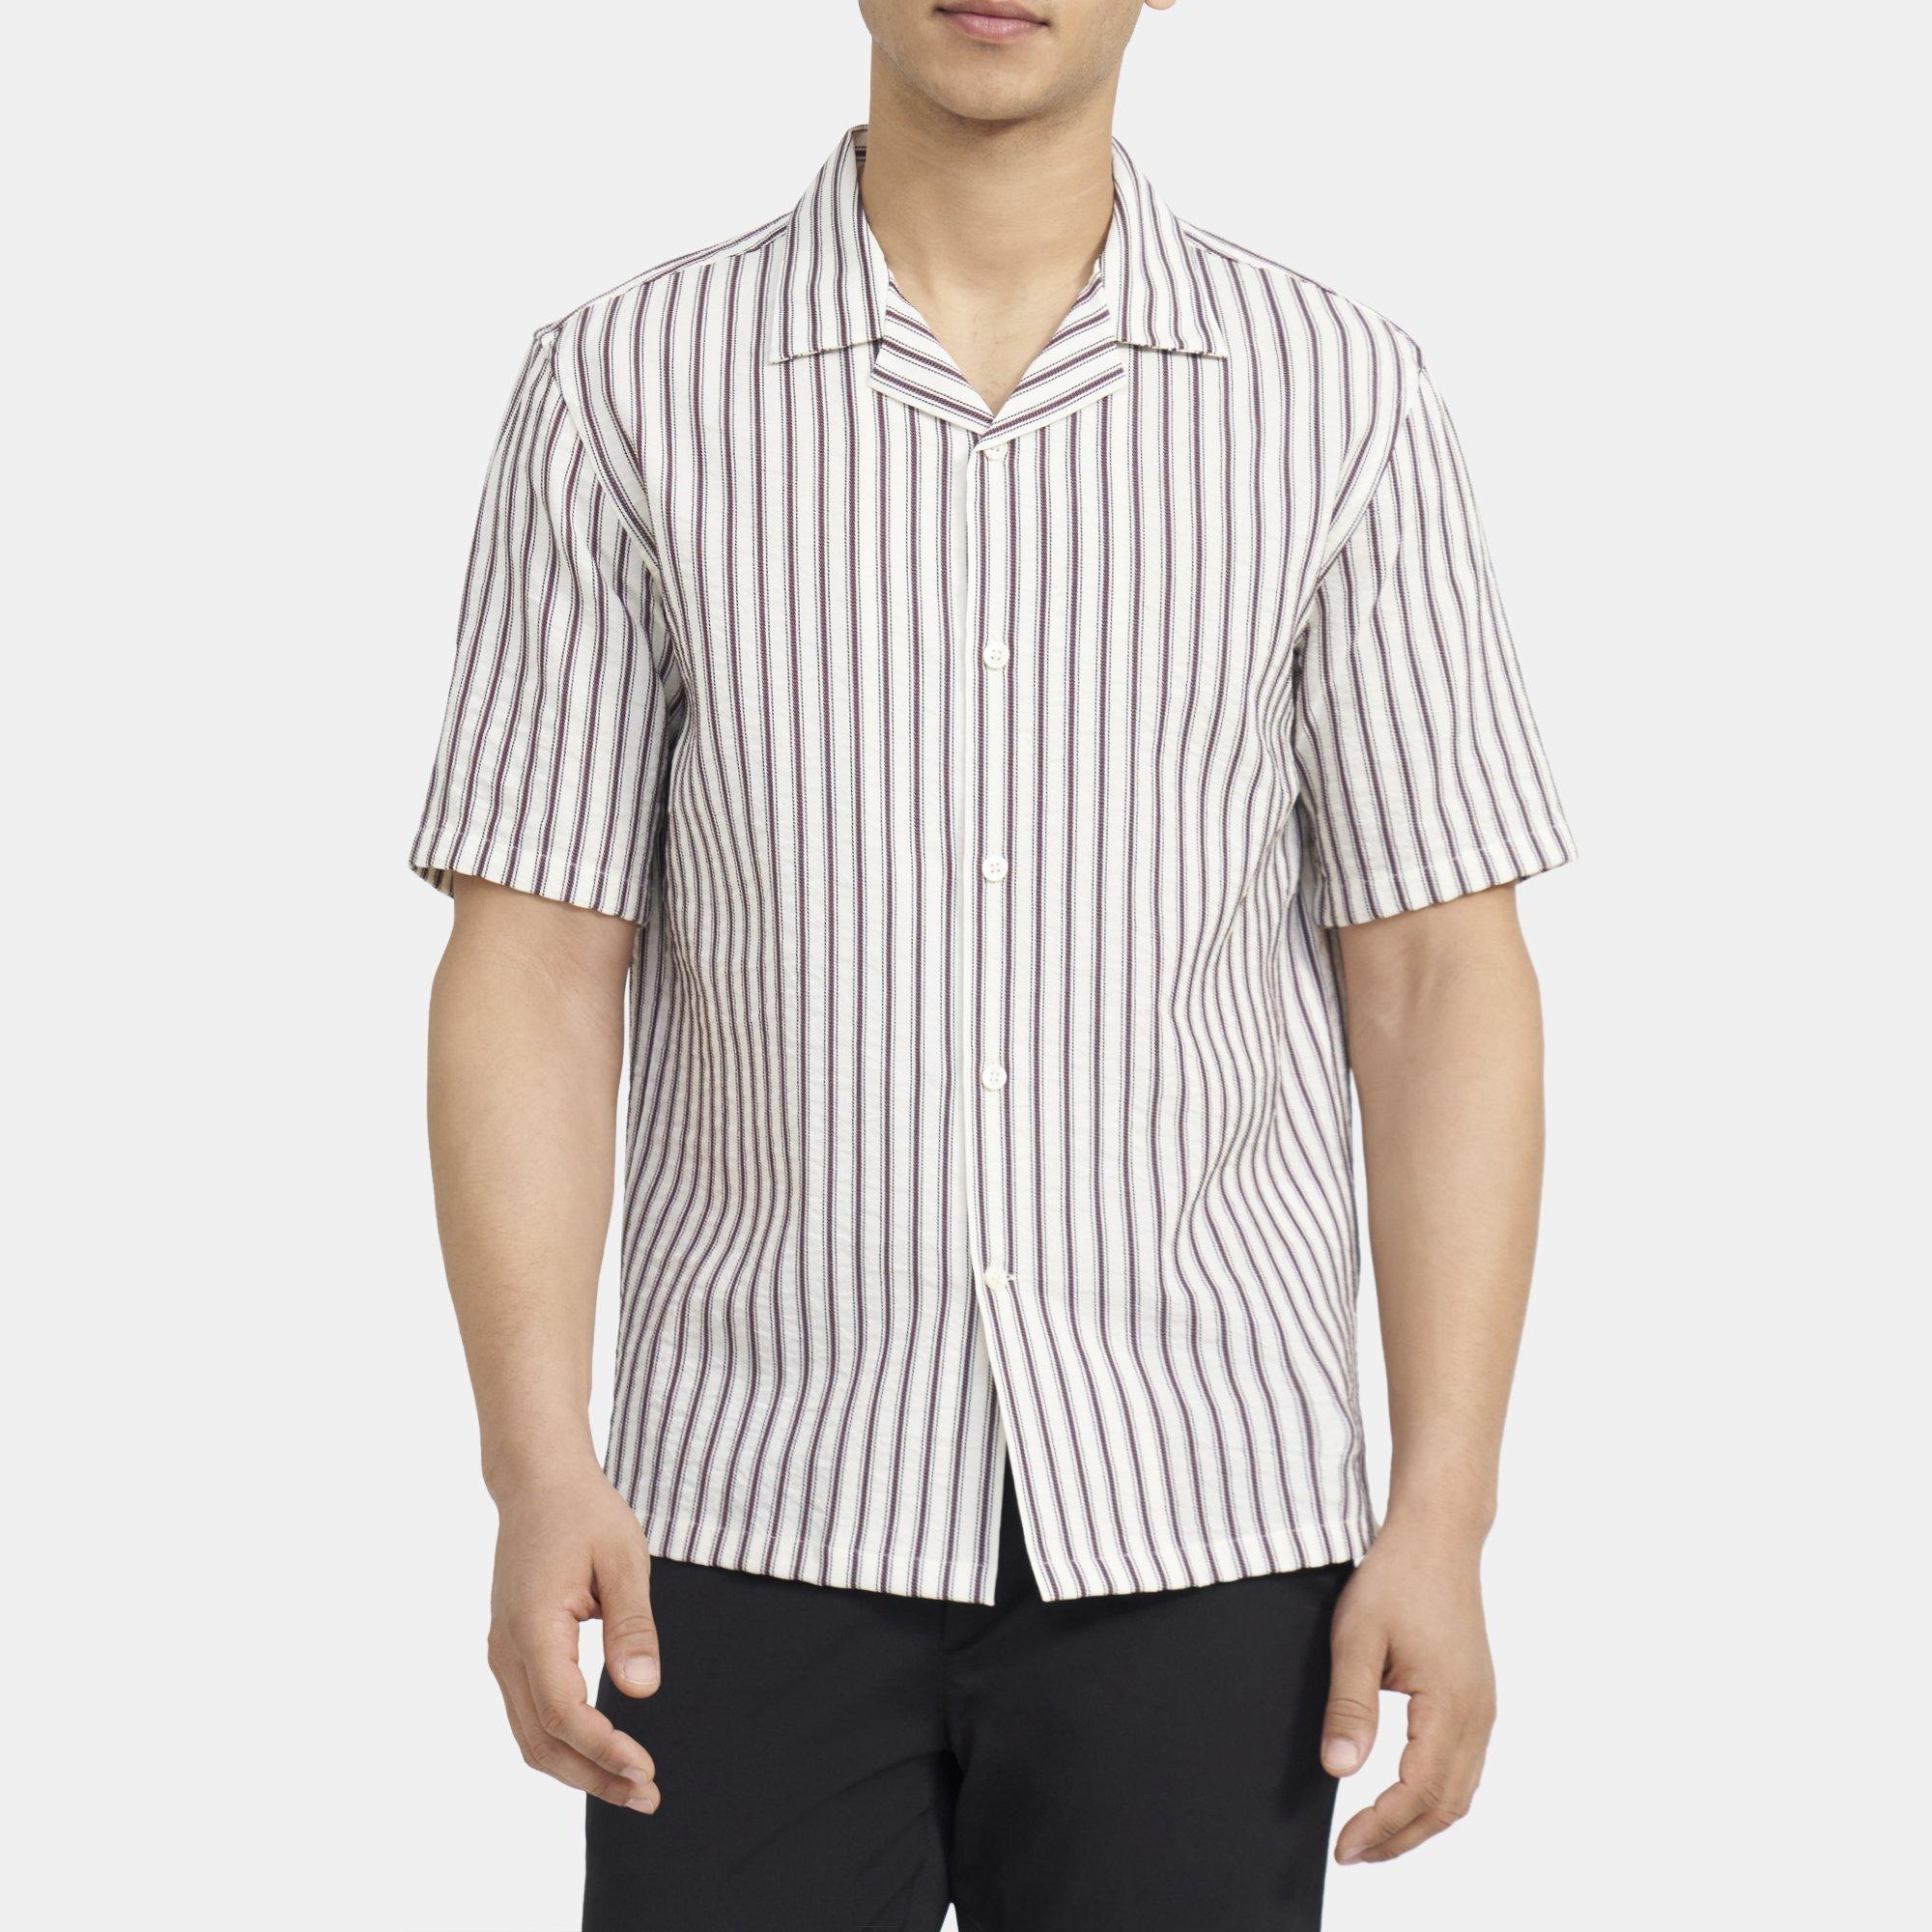 Theory Short-Sleeve Shirt in Striped Cotton-Blend